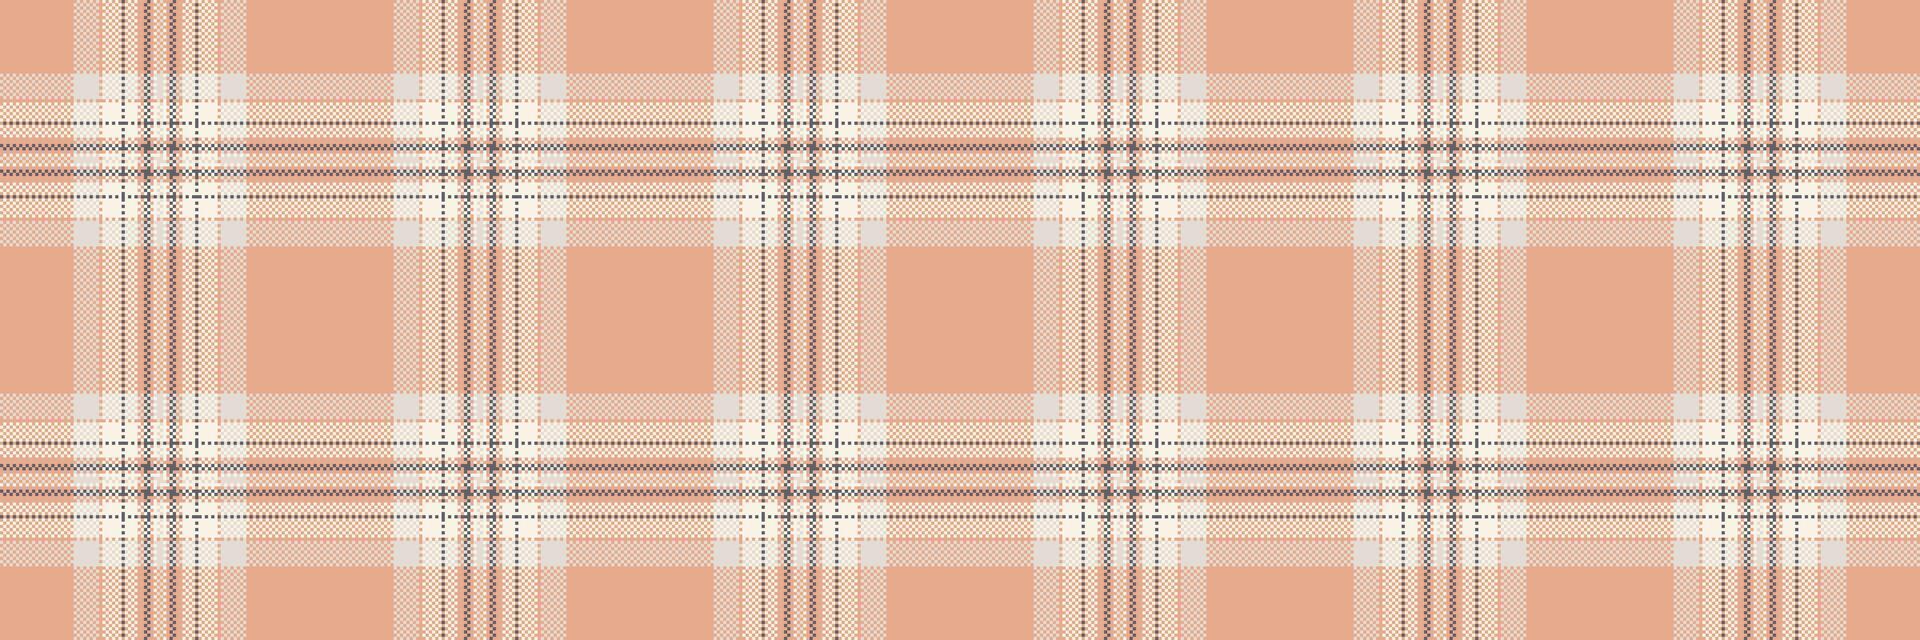 Sample vector tartan texture, ragged check background textile. Basic fabric seamless plaid pattern in orange and old lace colors.